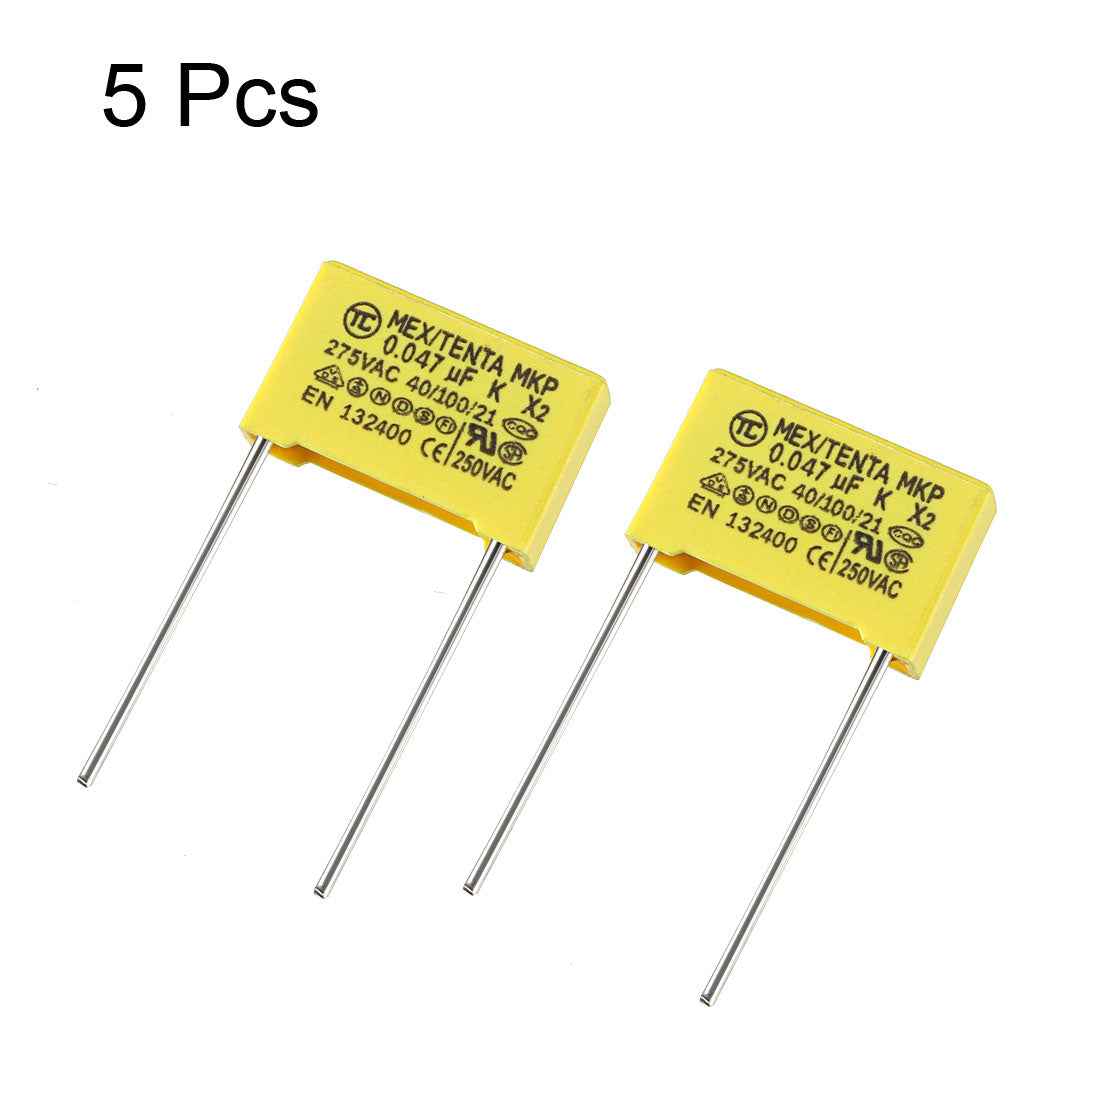 uxcell Uxcell Safety Capacitors Polypropylene Film 0.047uF 275VAC X2 MKP 13.5mm Pin Pitch 5 Pcs